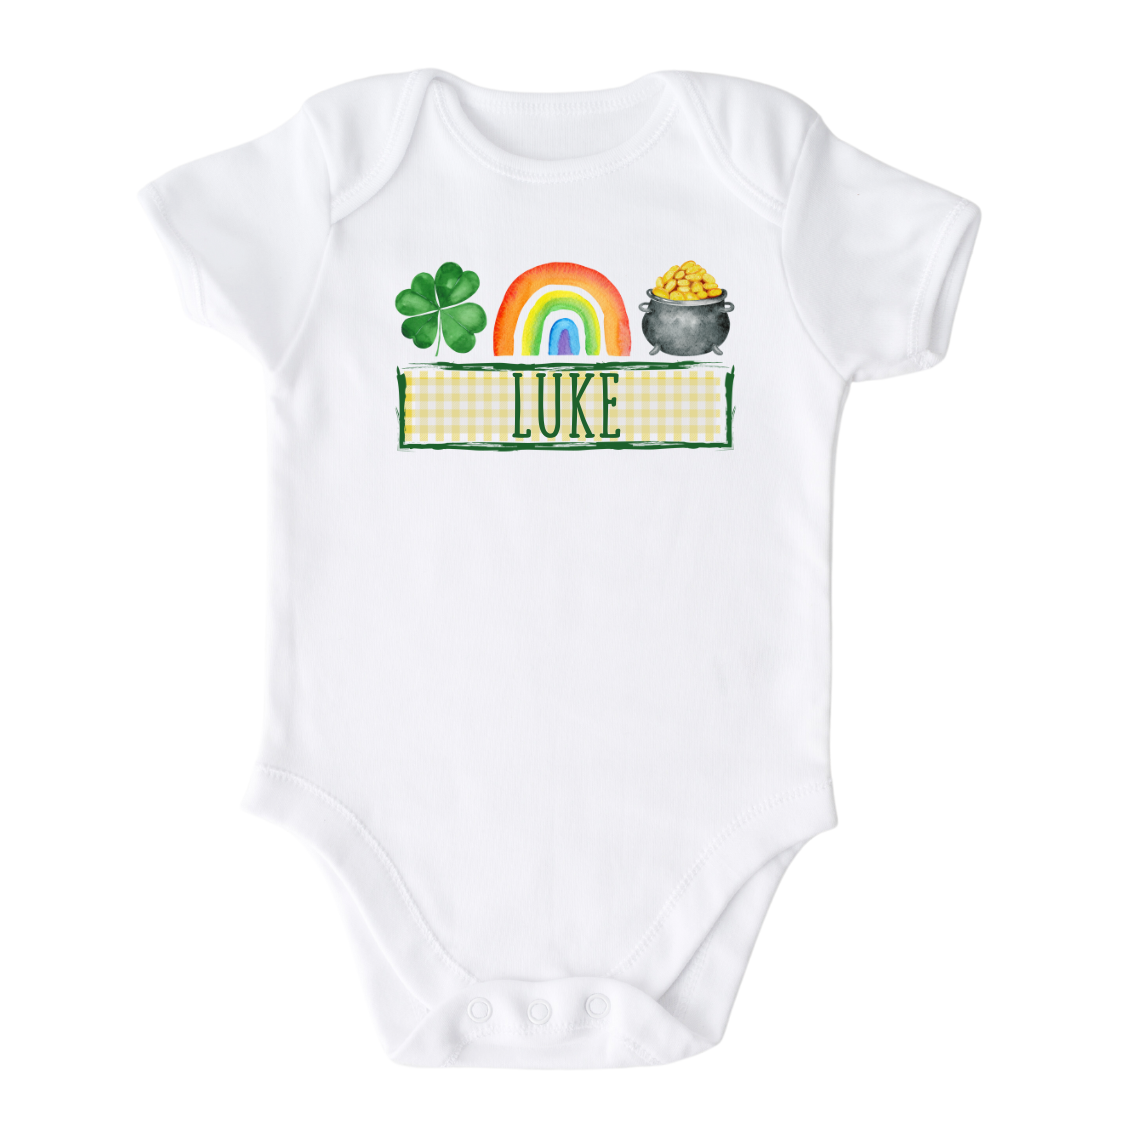 Personalized Outfit St. Patrick’s Day Custom Name Baby Onesie® Newborn Outfit